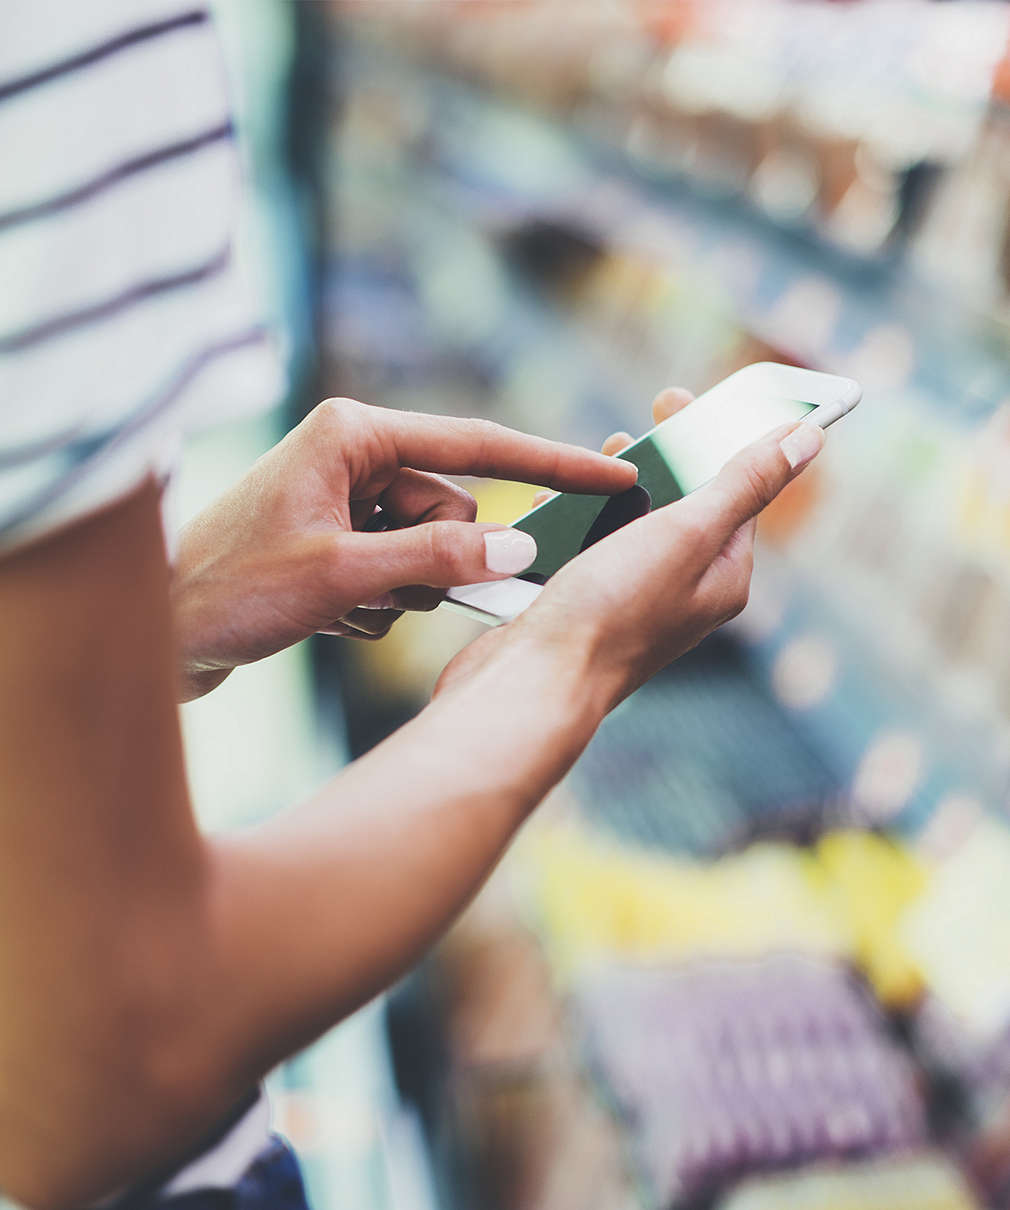 Woman with mobile phone in front of a refrigerated shelf